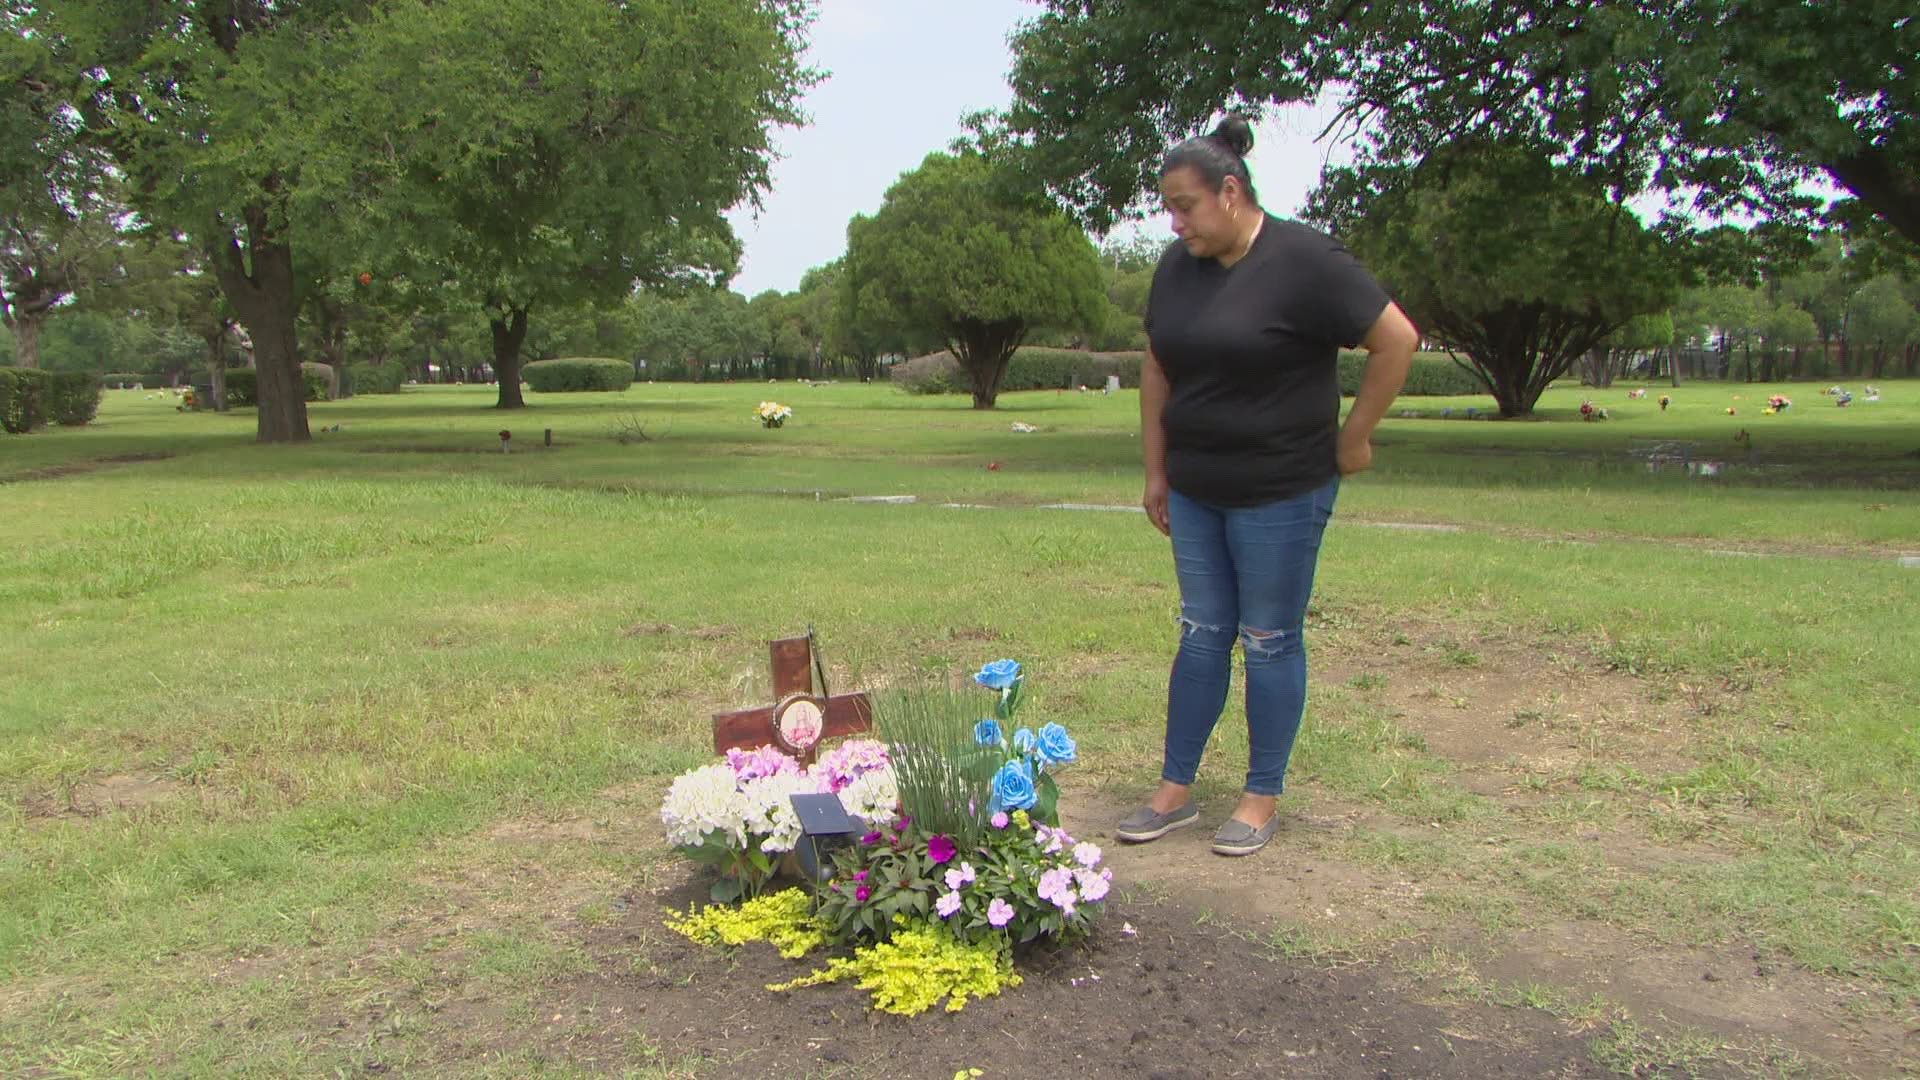 Janet Valleza says her heart breaks every time she hears of another homicide. Her 16-year-old daughter was killed last August at a Dallas apartment complex.